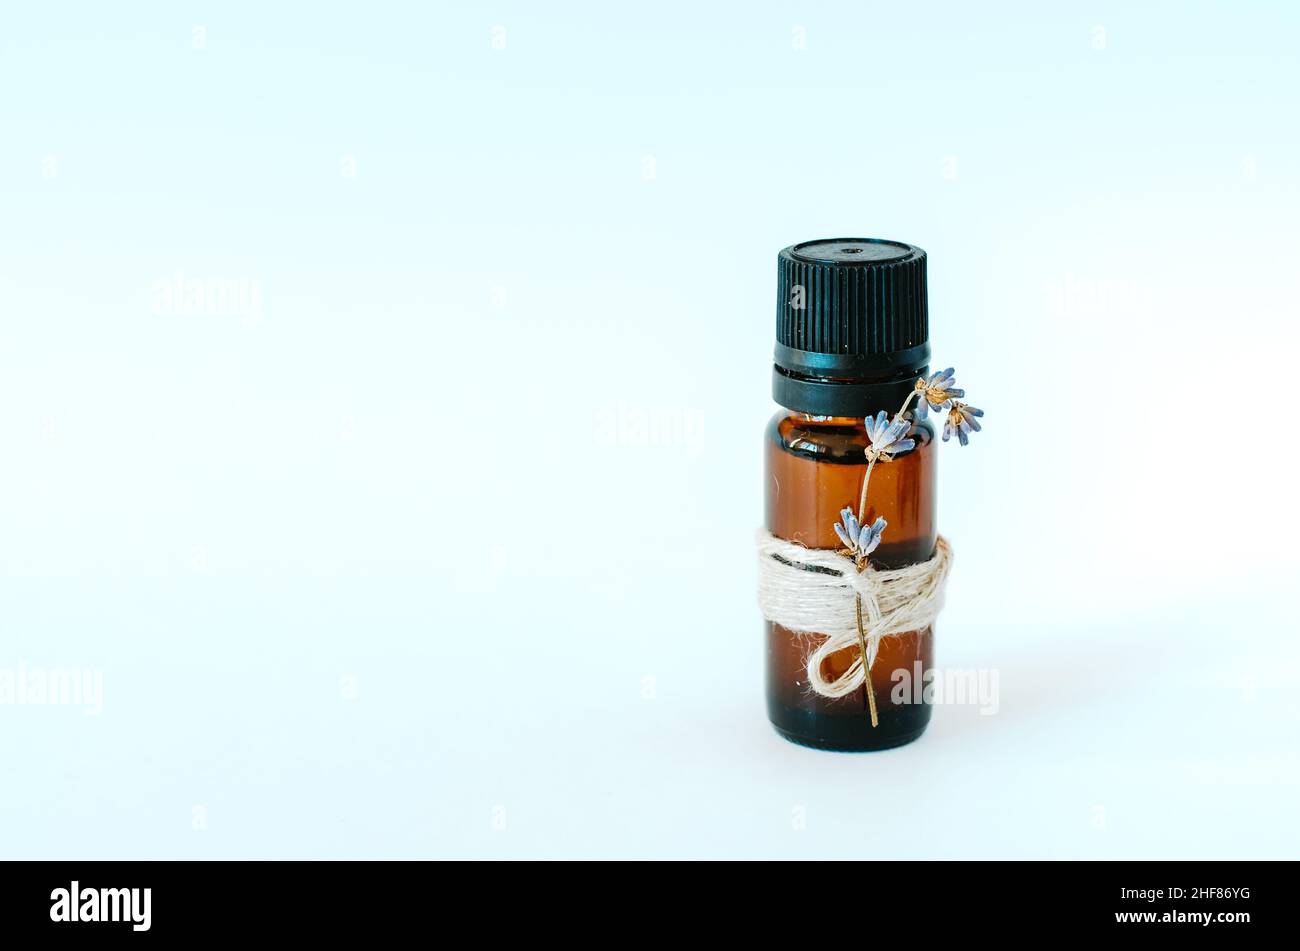 Isolated bottle of essential oil/perfume hand crafted, on white background with copy space Stock Photo